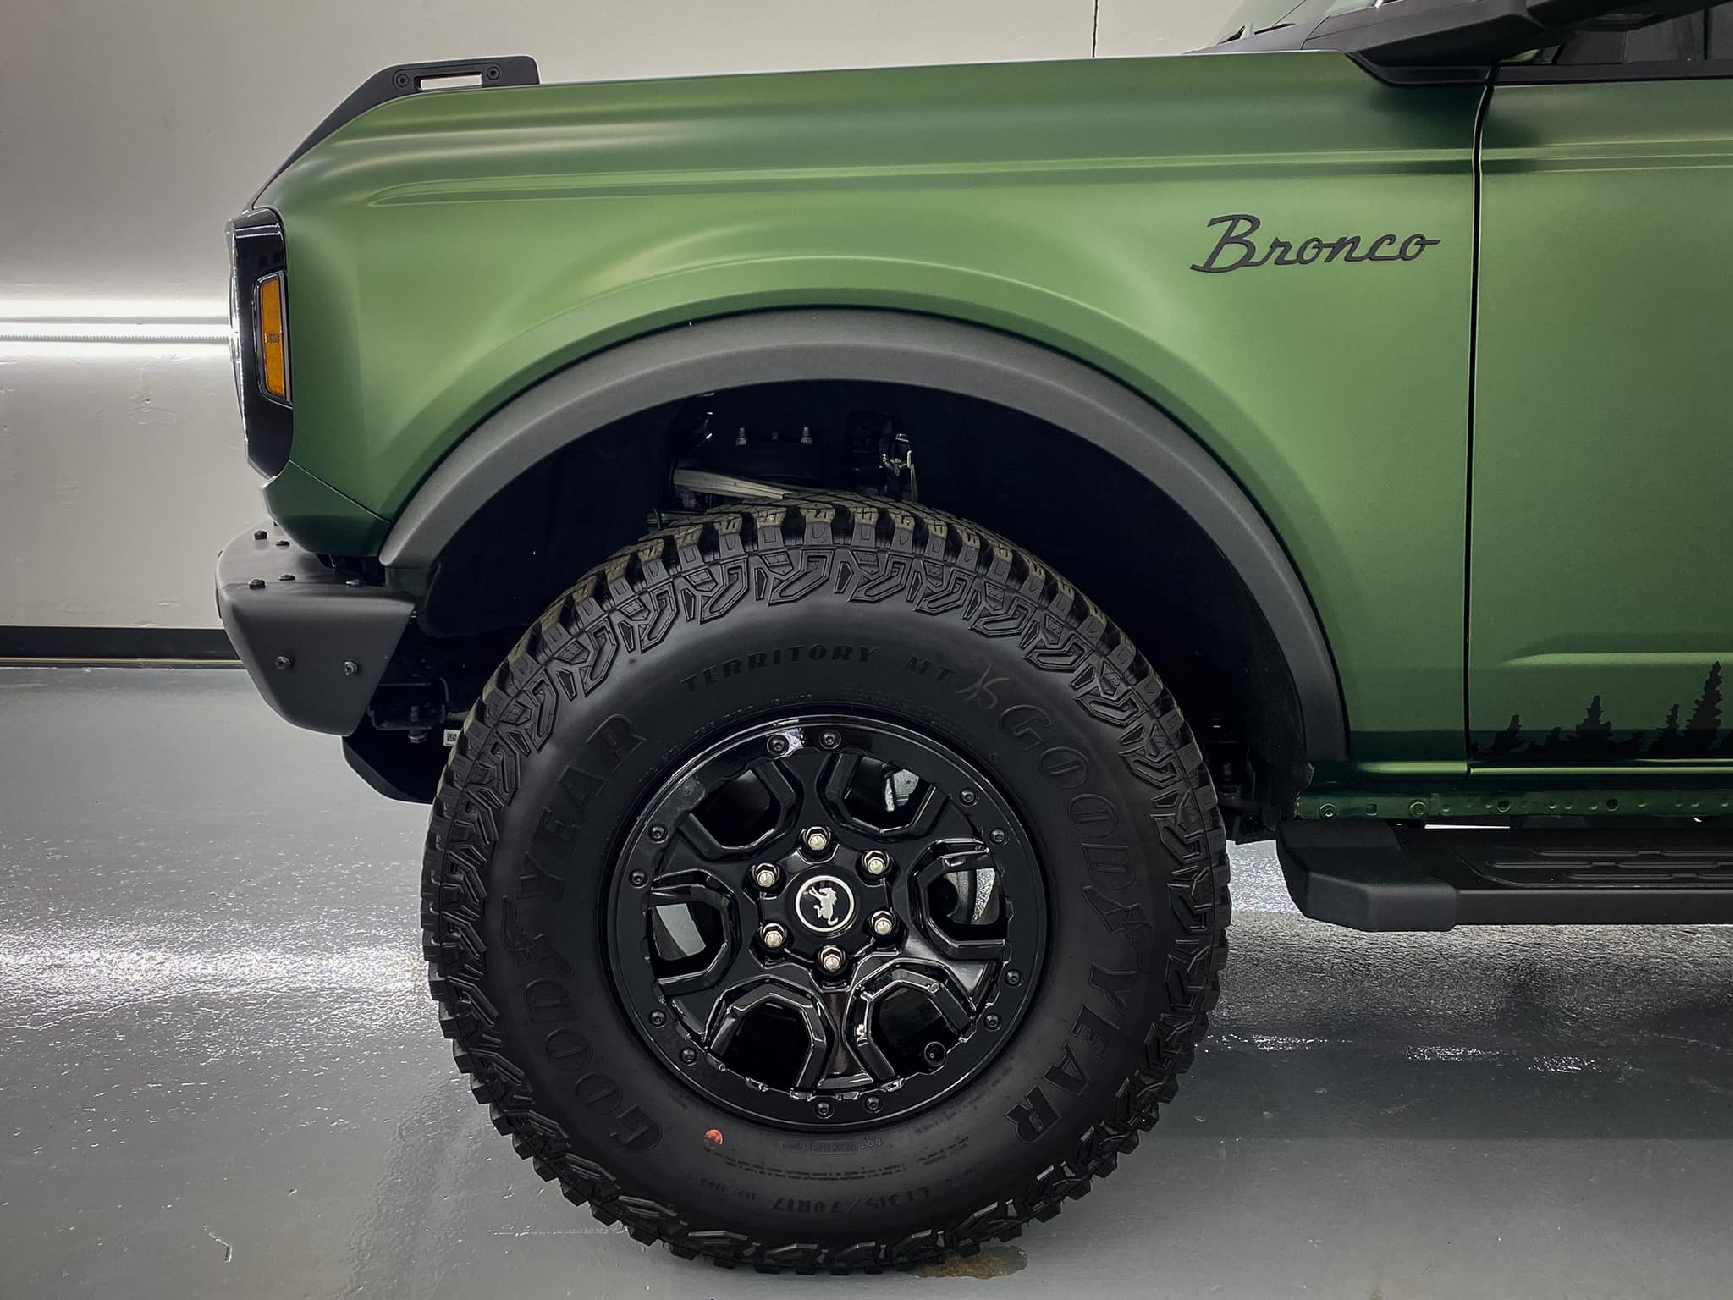 Ford Bronco Need help picking color! Eruption Green Bronco XPEL Stealth PPF Wrapped + Graphics + Racing Stripes 3